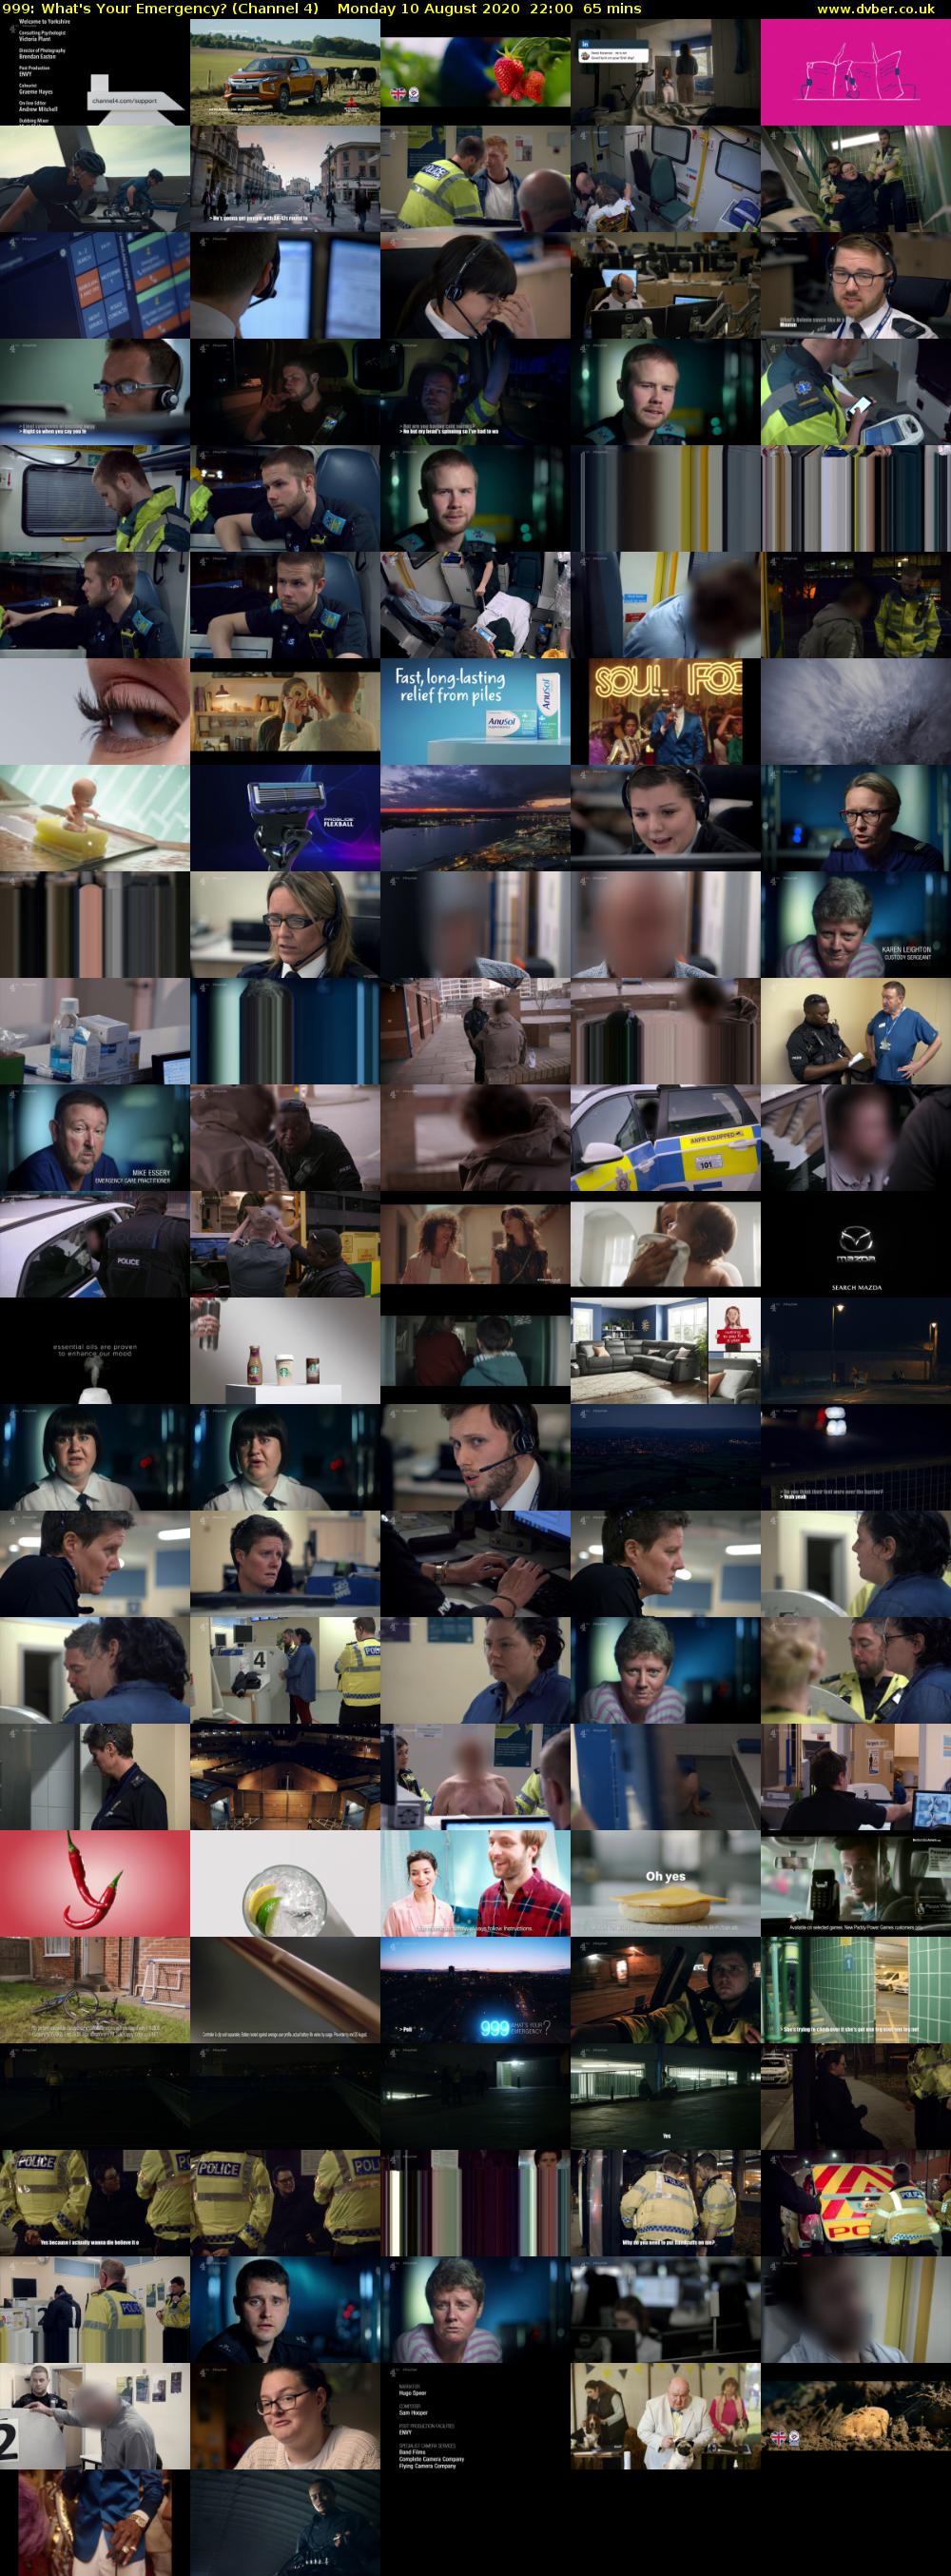 999: What's Your Emergency? (Channel 4) Monday 10 August 2020 22:00 - 23:05